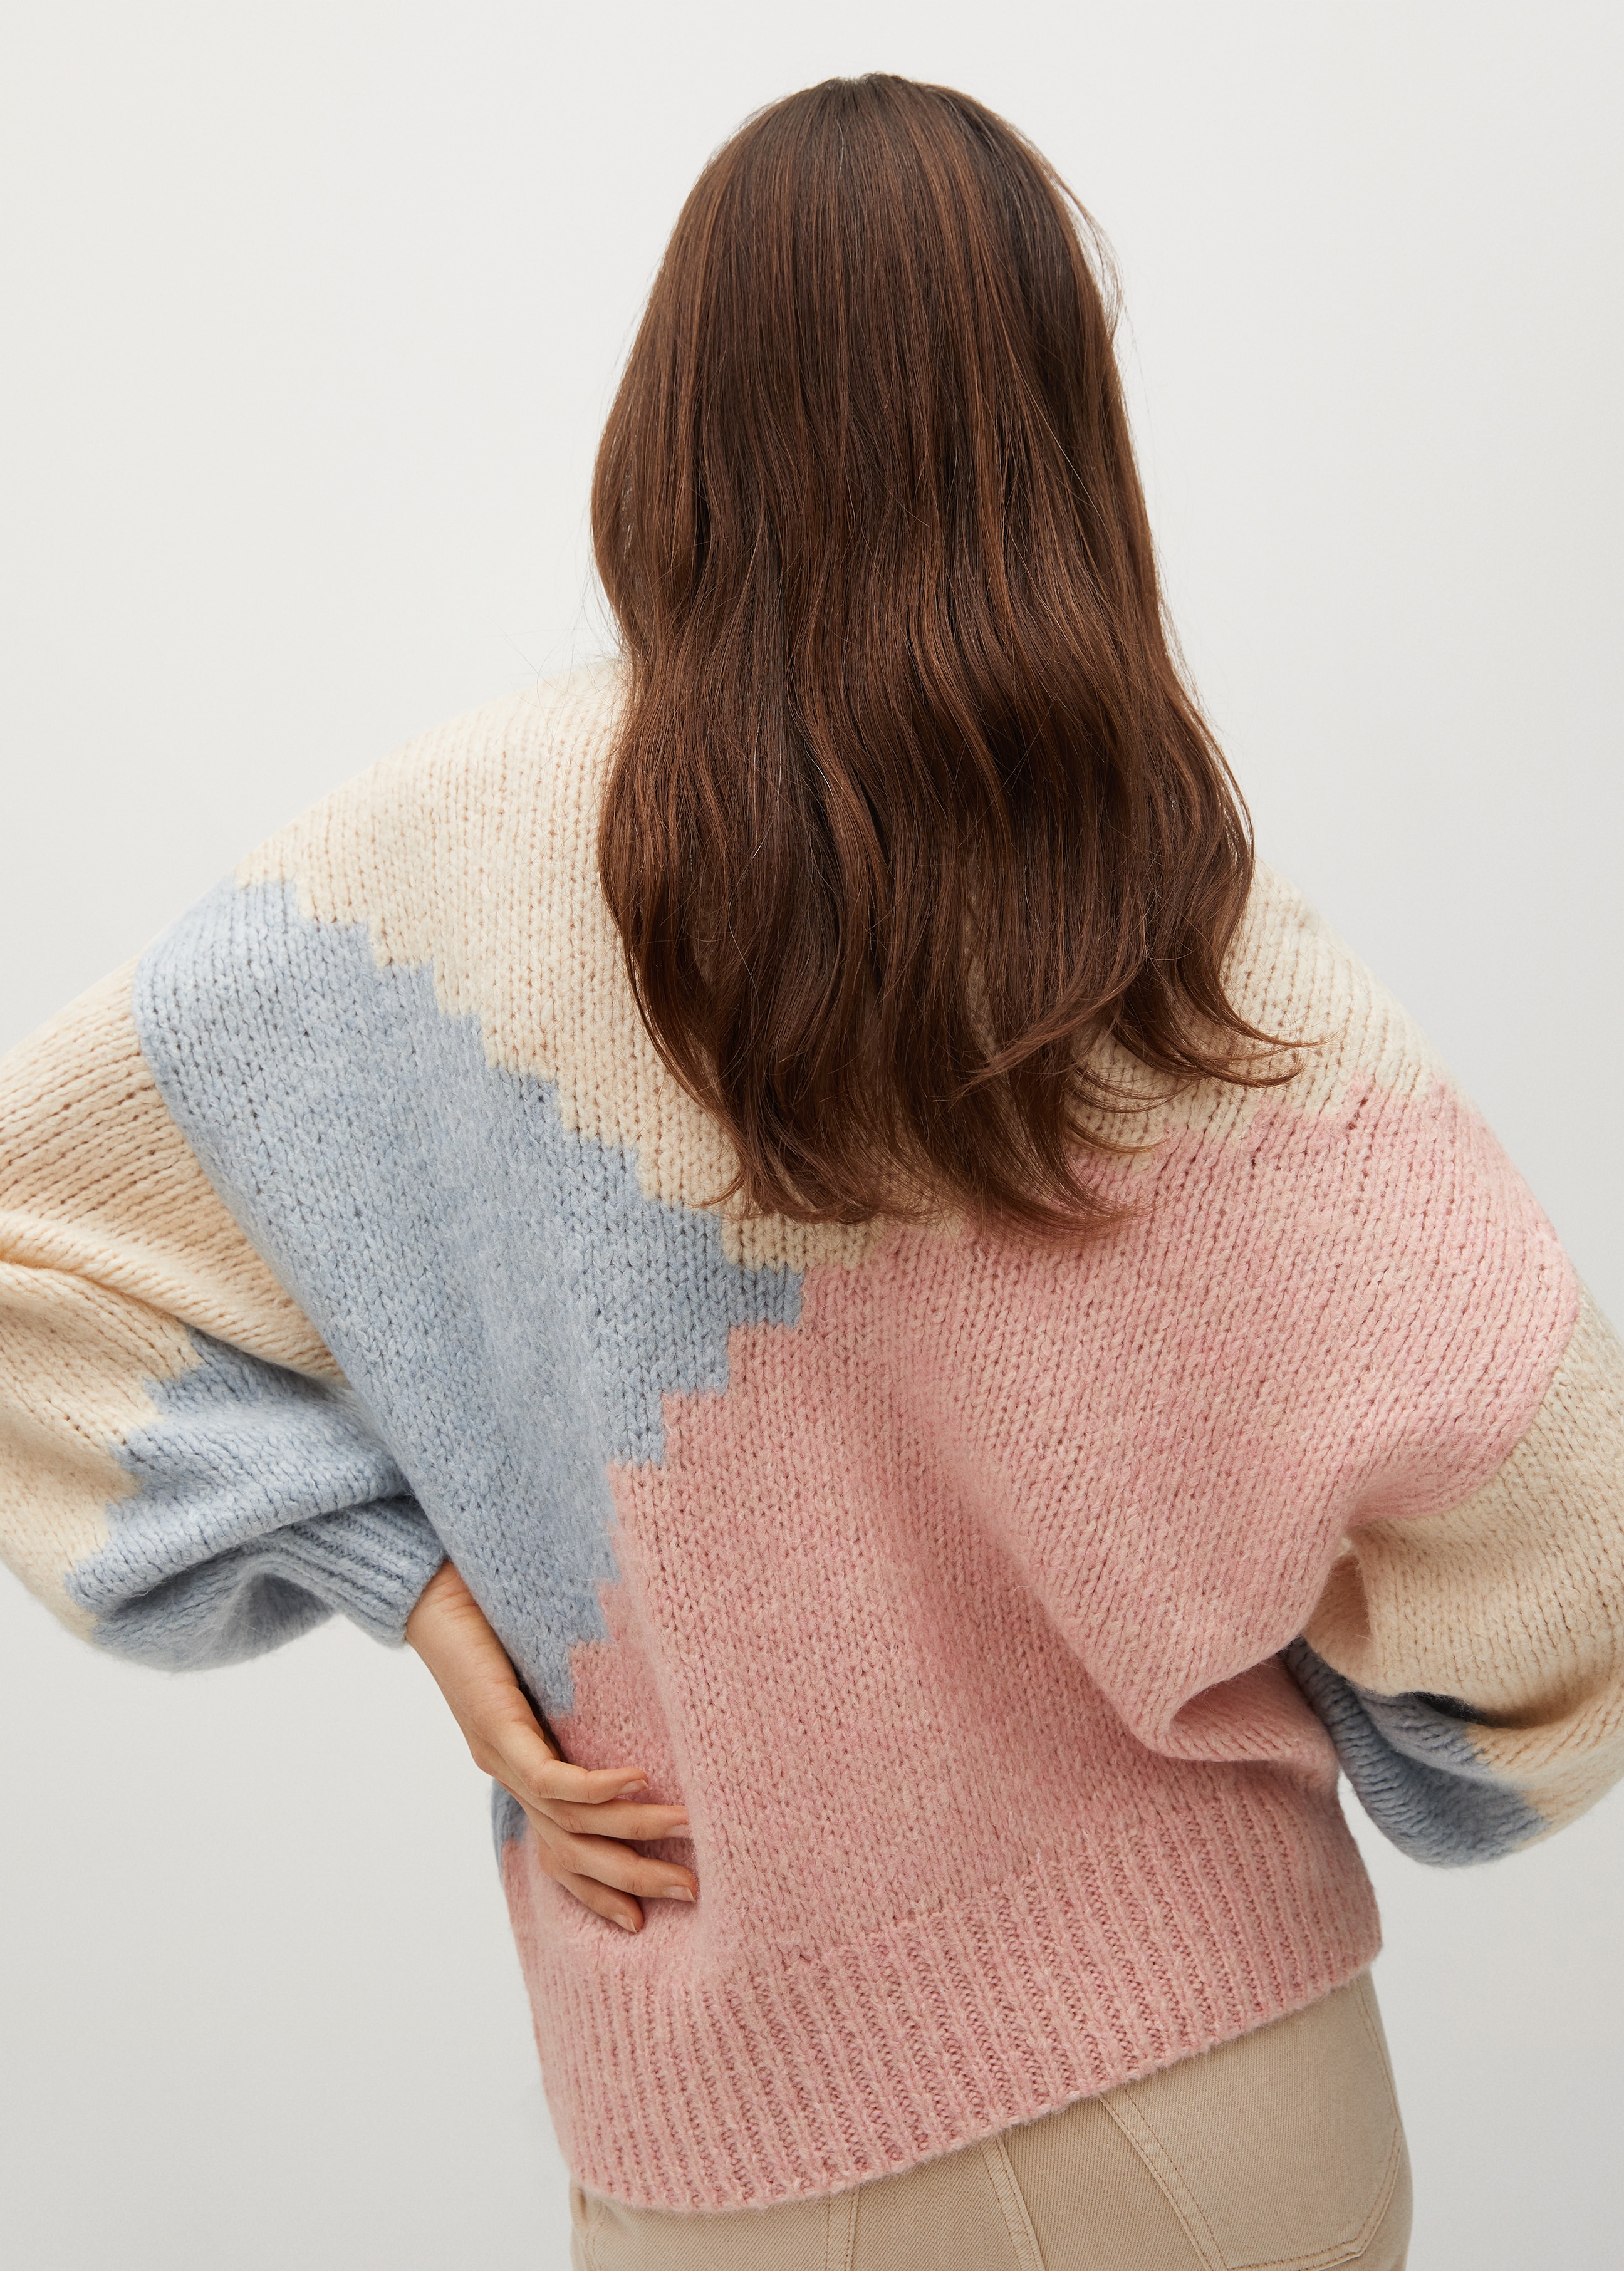 Multi-colored knit sweater - Reverse of the article